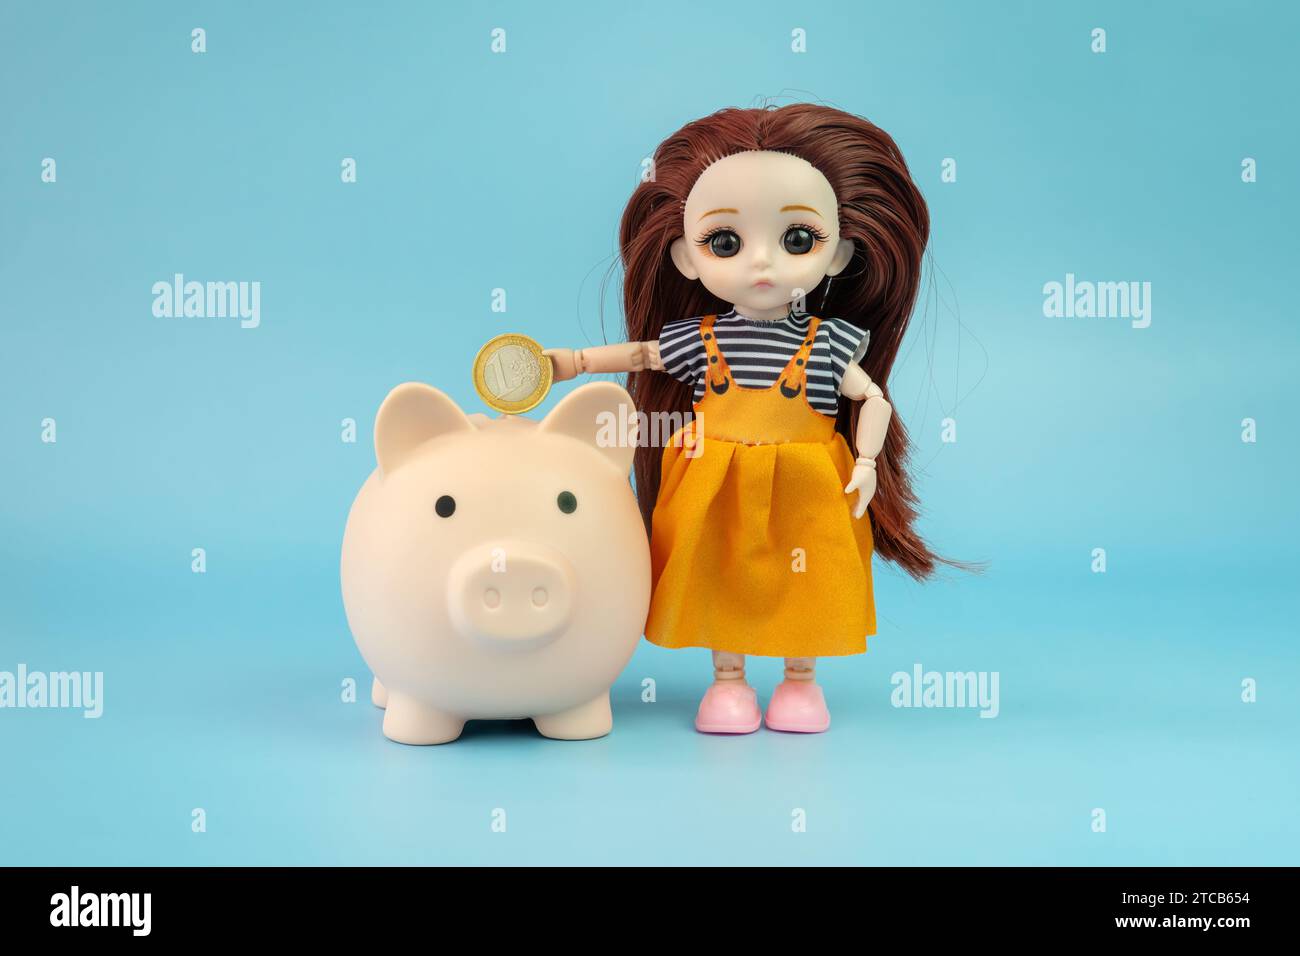 A small child doll with a coin in her hands on a blue background. The doll puts a coin in the piggy bank. Stock Photo